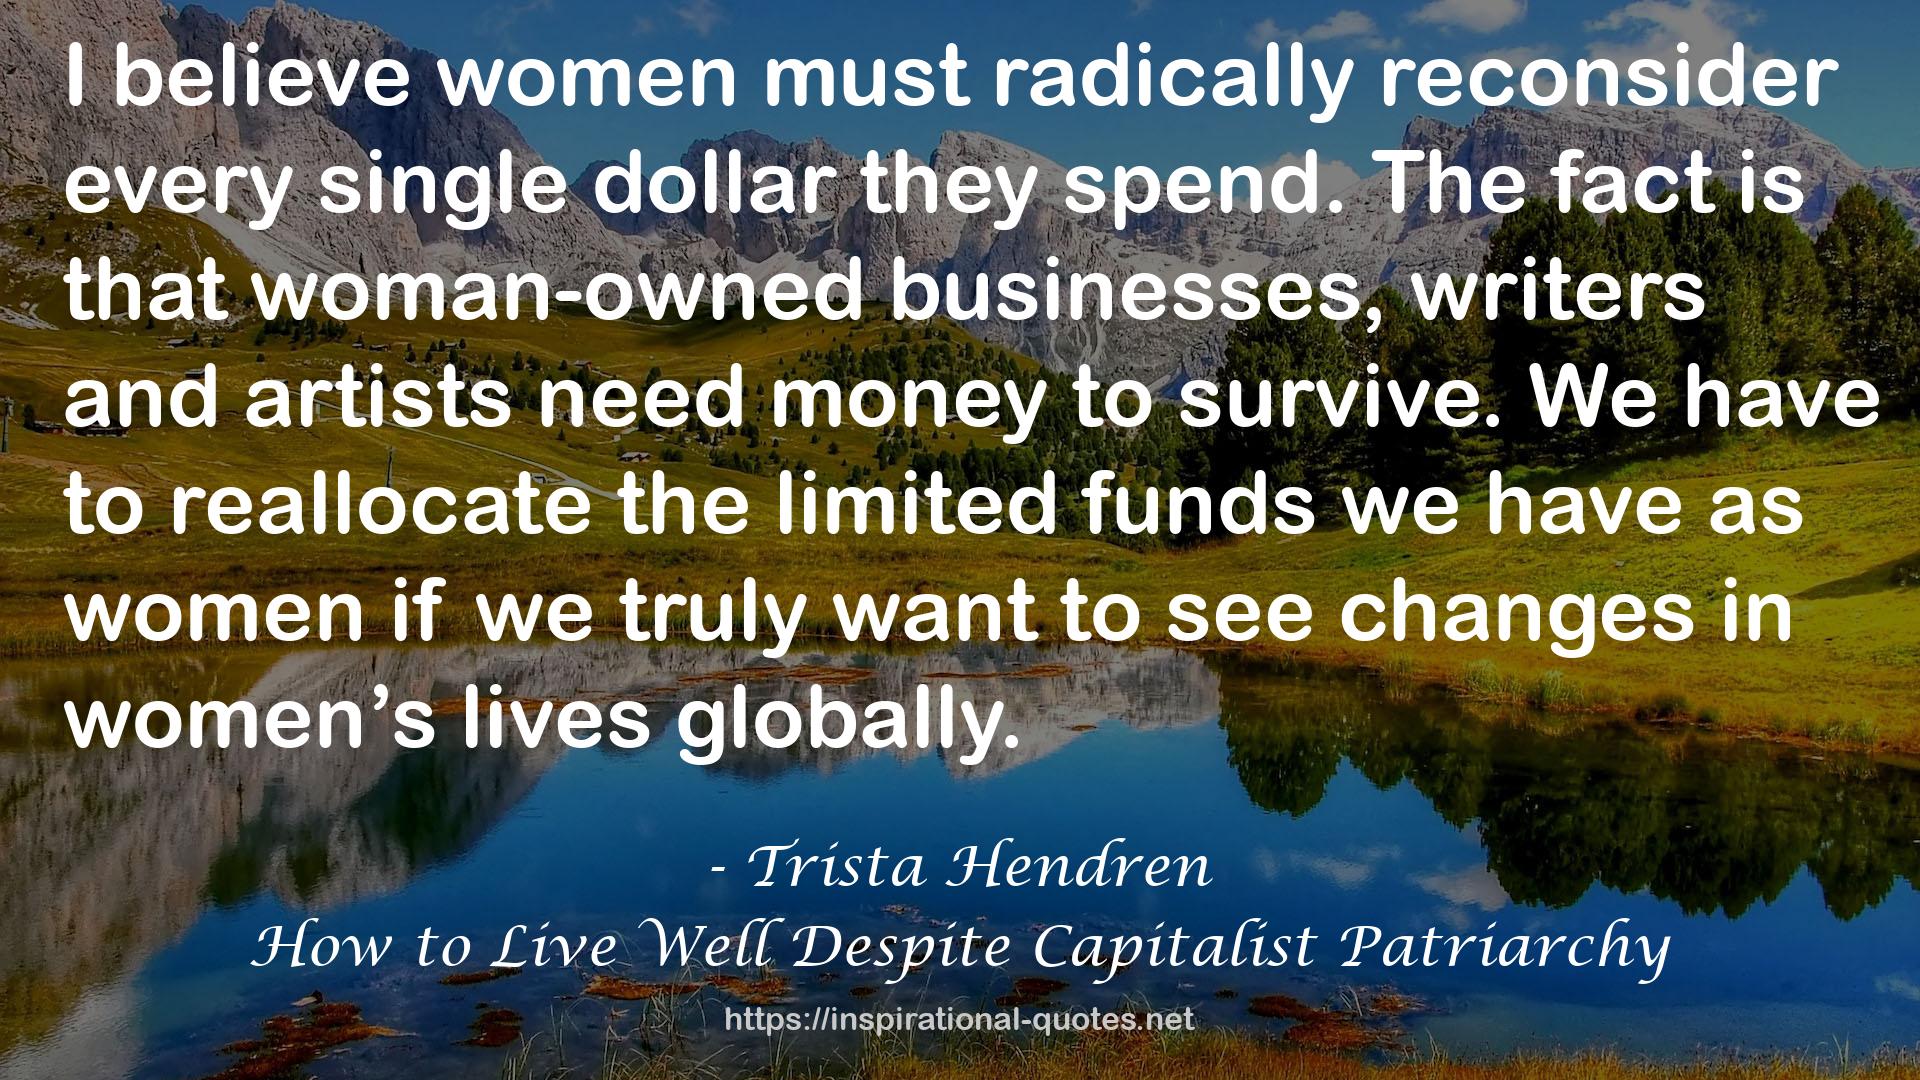 How to Live Well Despite Capitalist Patriarchy QUOTES